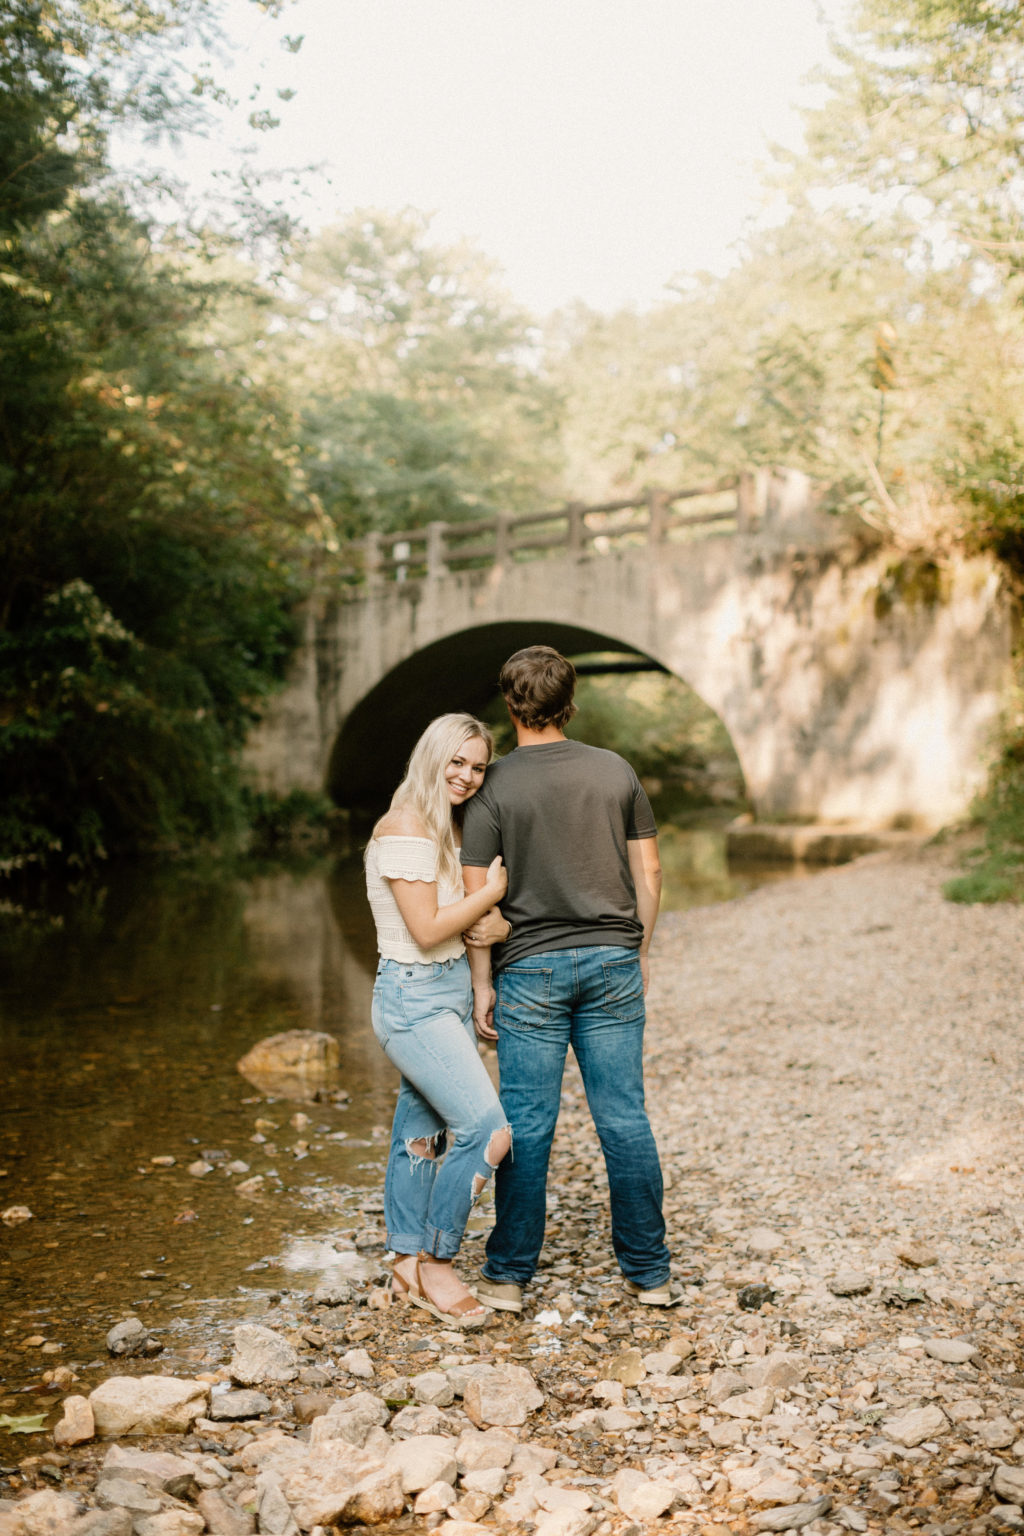 The 10 Best Engagement Shoot Locations In Arkansas | jessicavickers.com